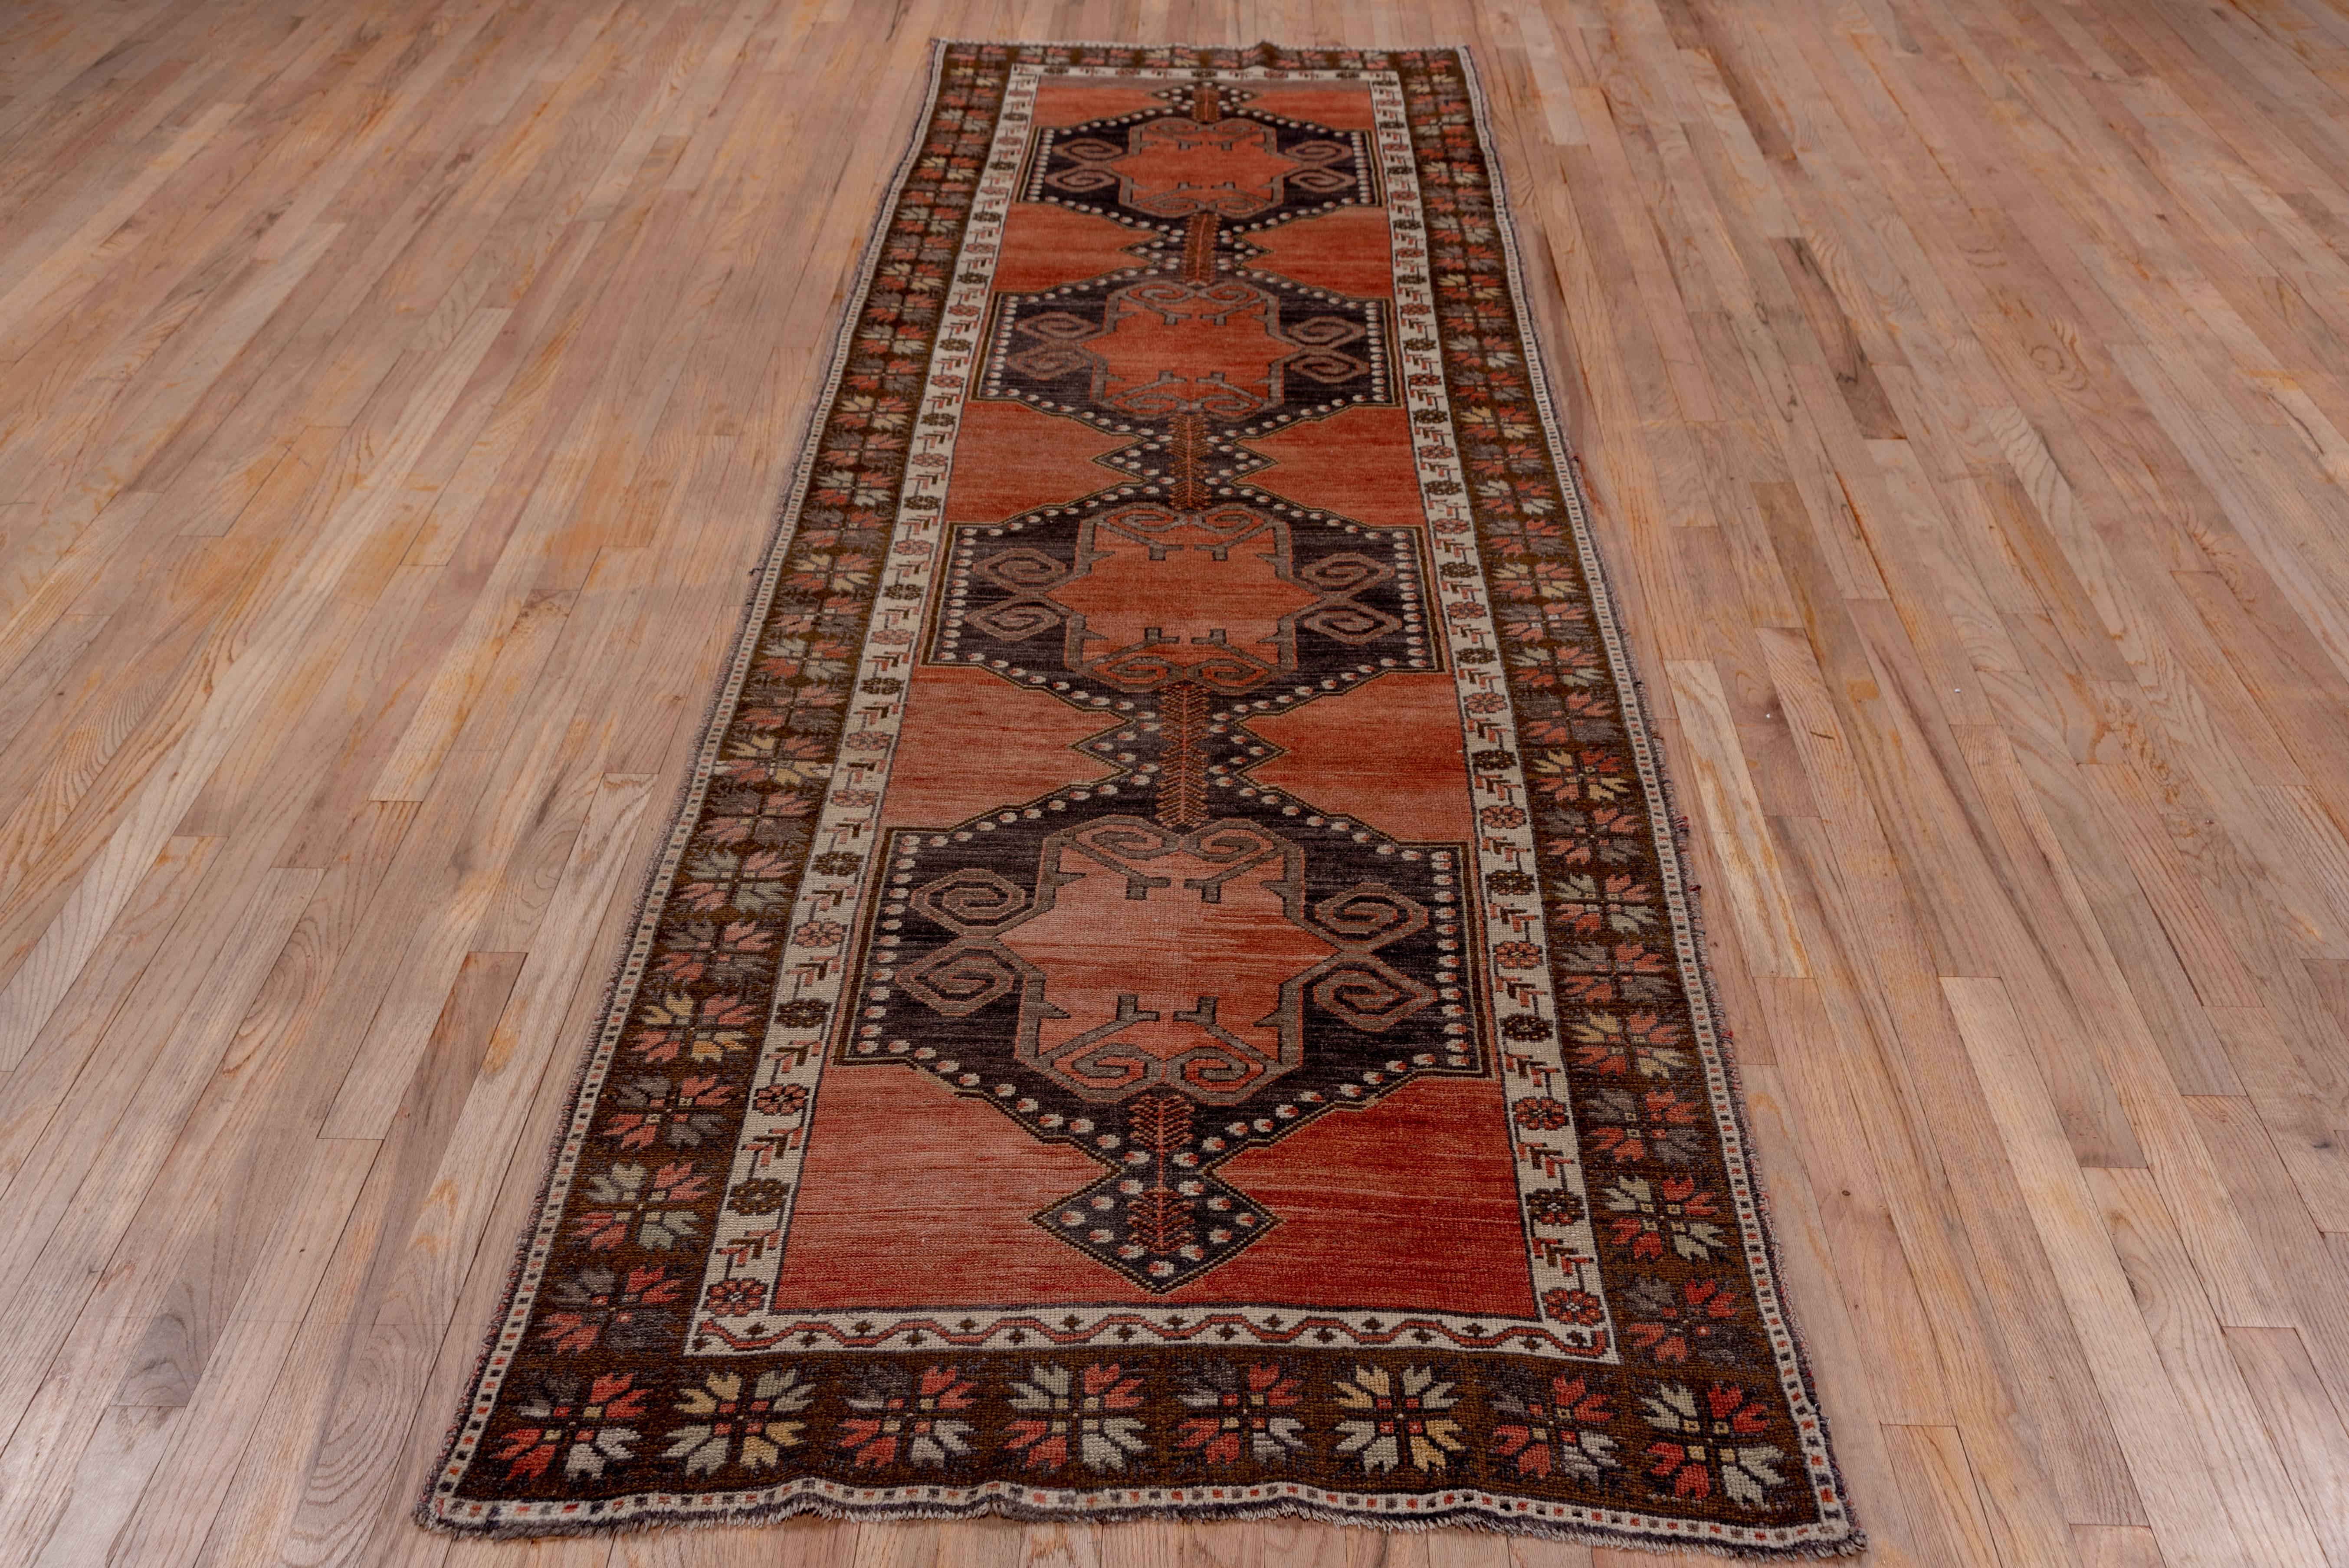 This central Anatolian all wool runner has an abrashed brown field decorated with a pole medallion of dark brown conjoint hexagons enclosing gull like motives. The dark brown border of four bud rosettes is a characteristic of central Turkish rugs.